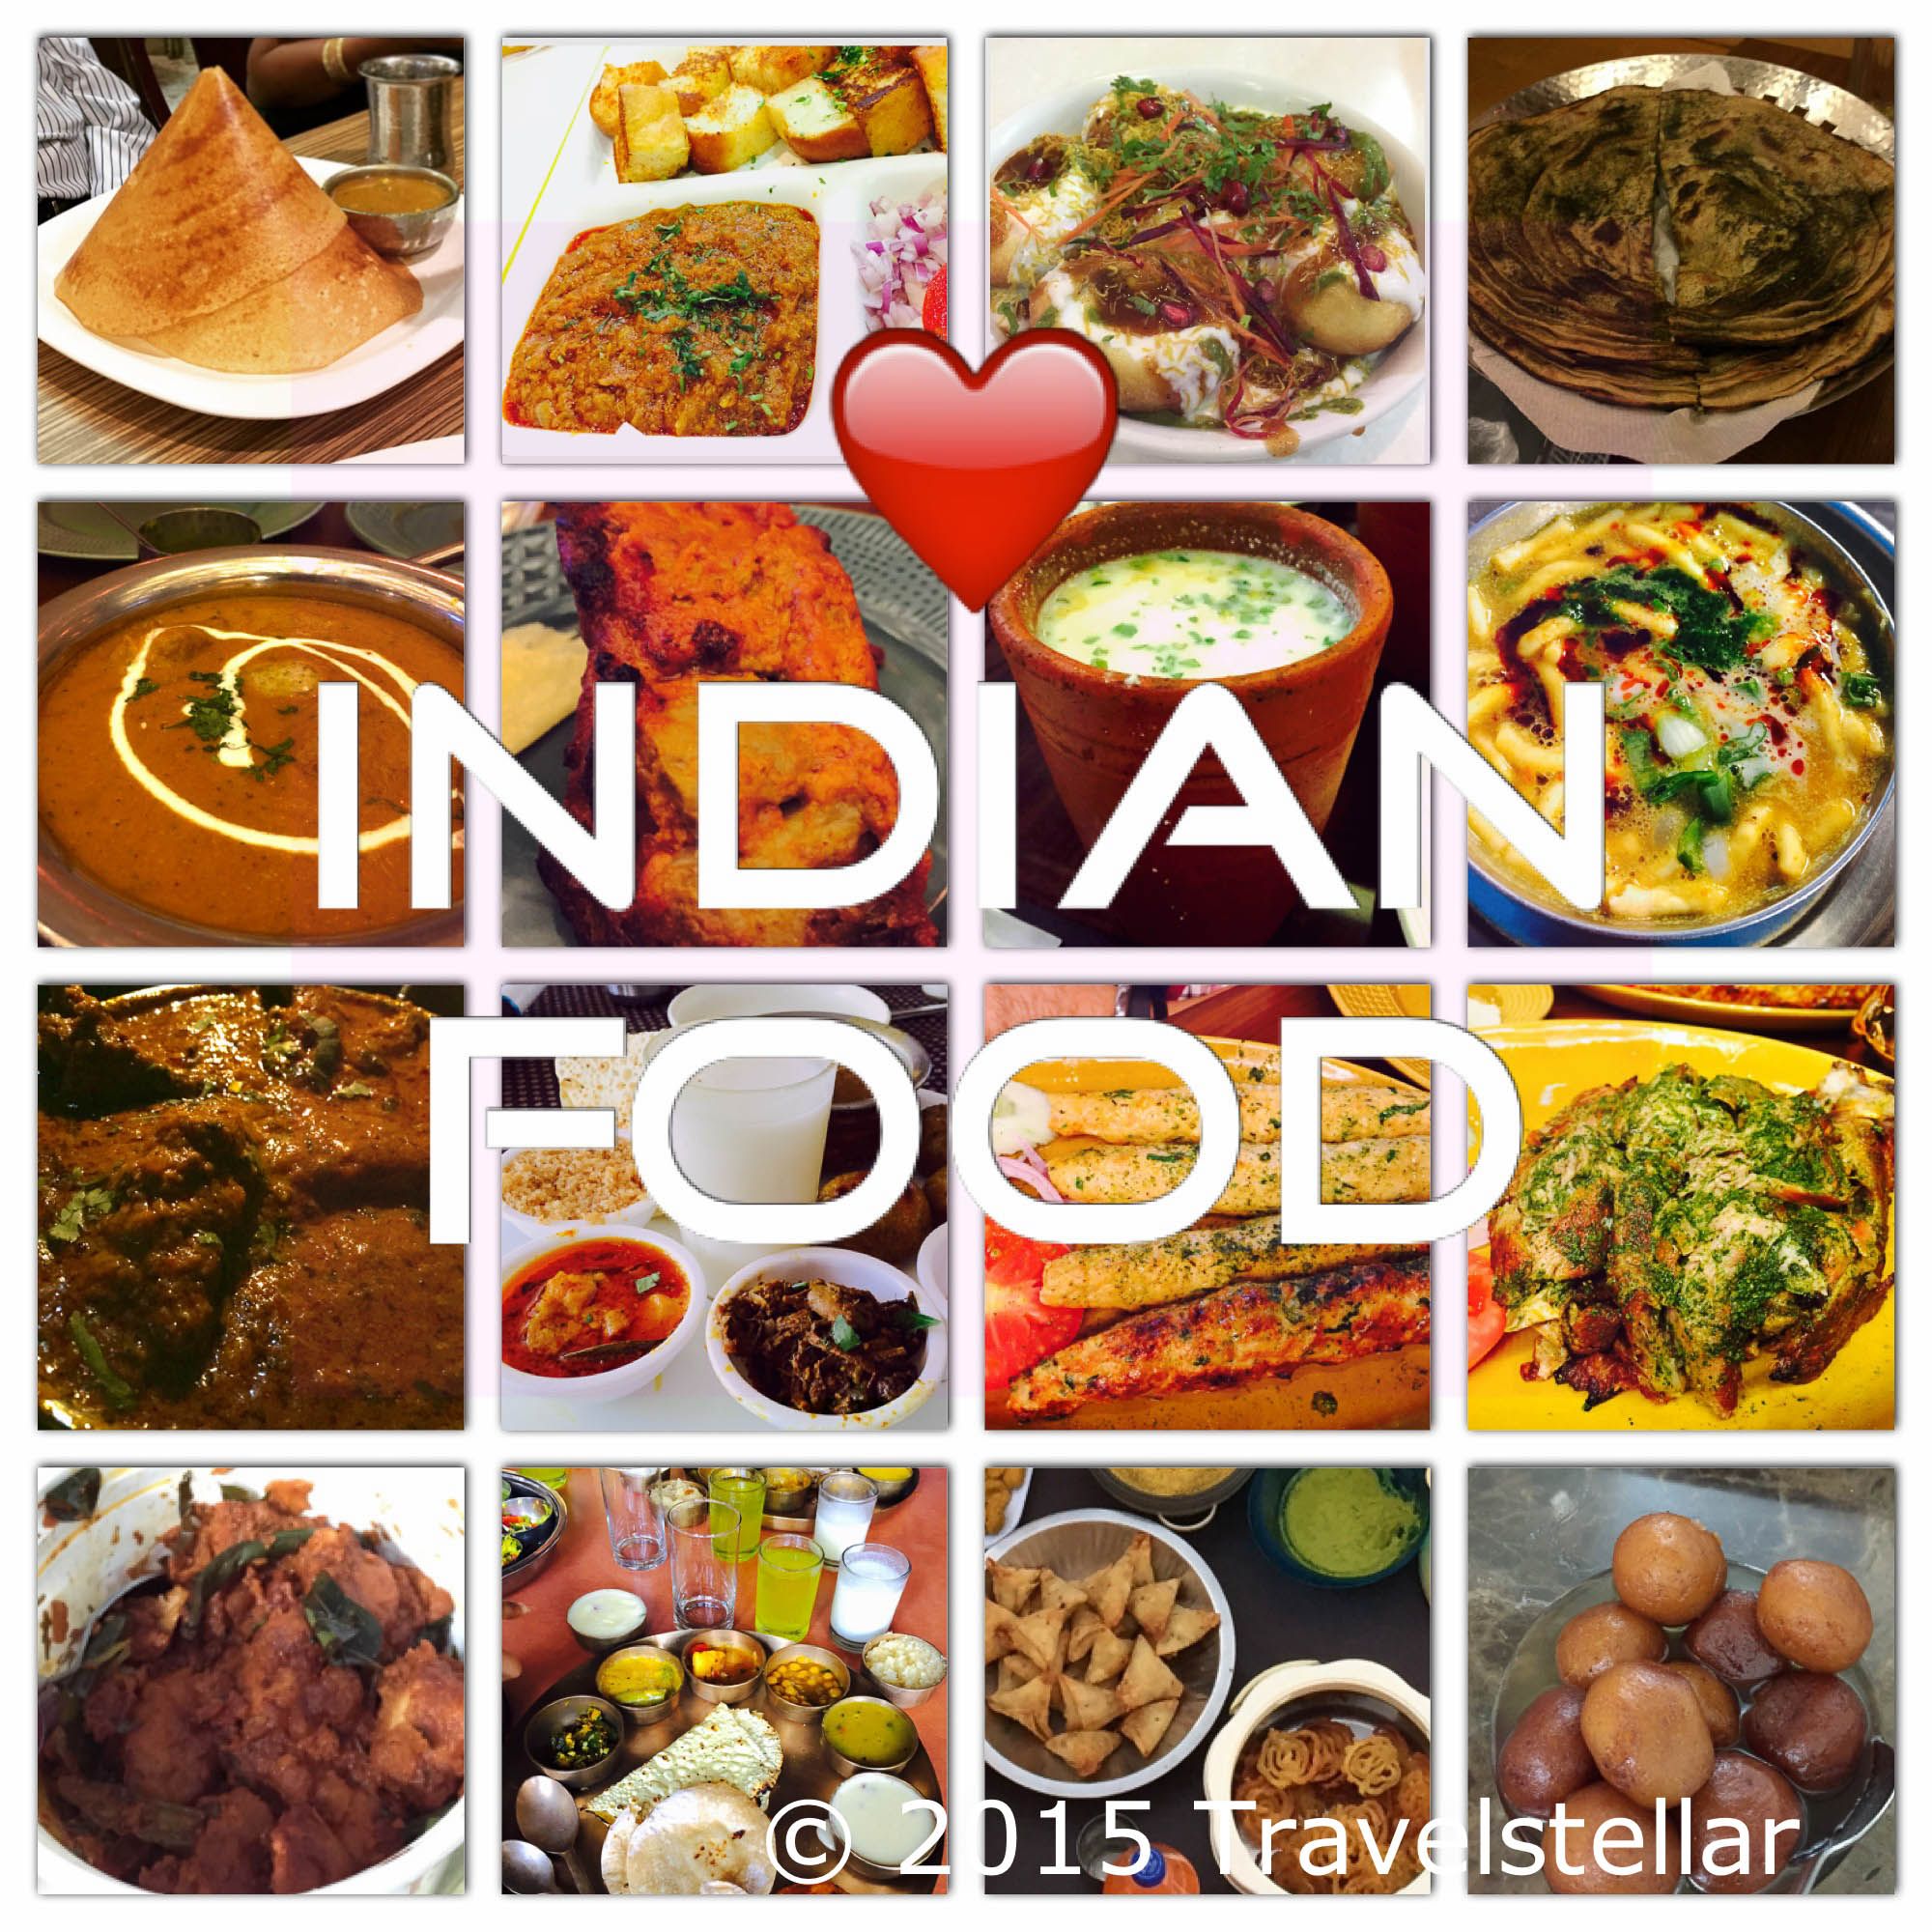 For the love of (Indian) food!!!